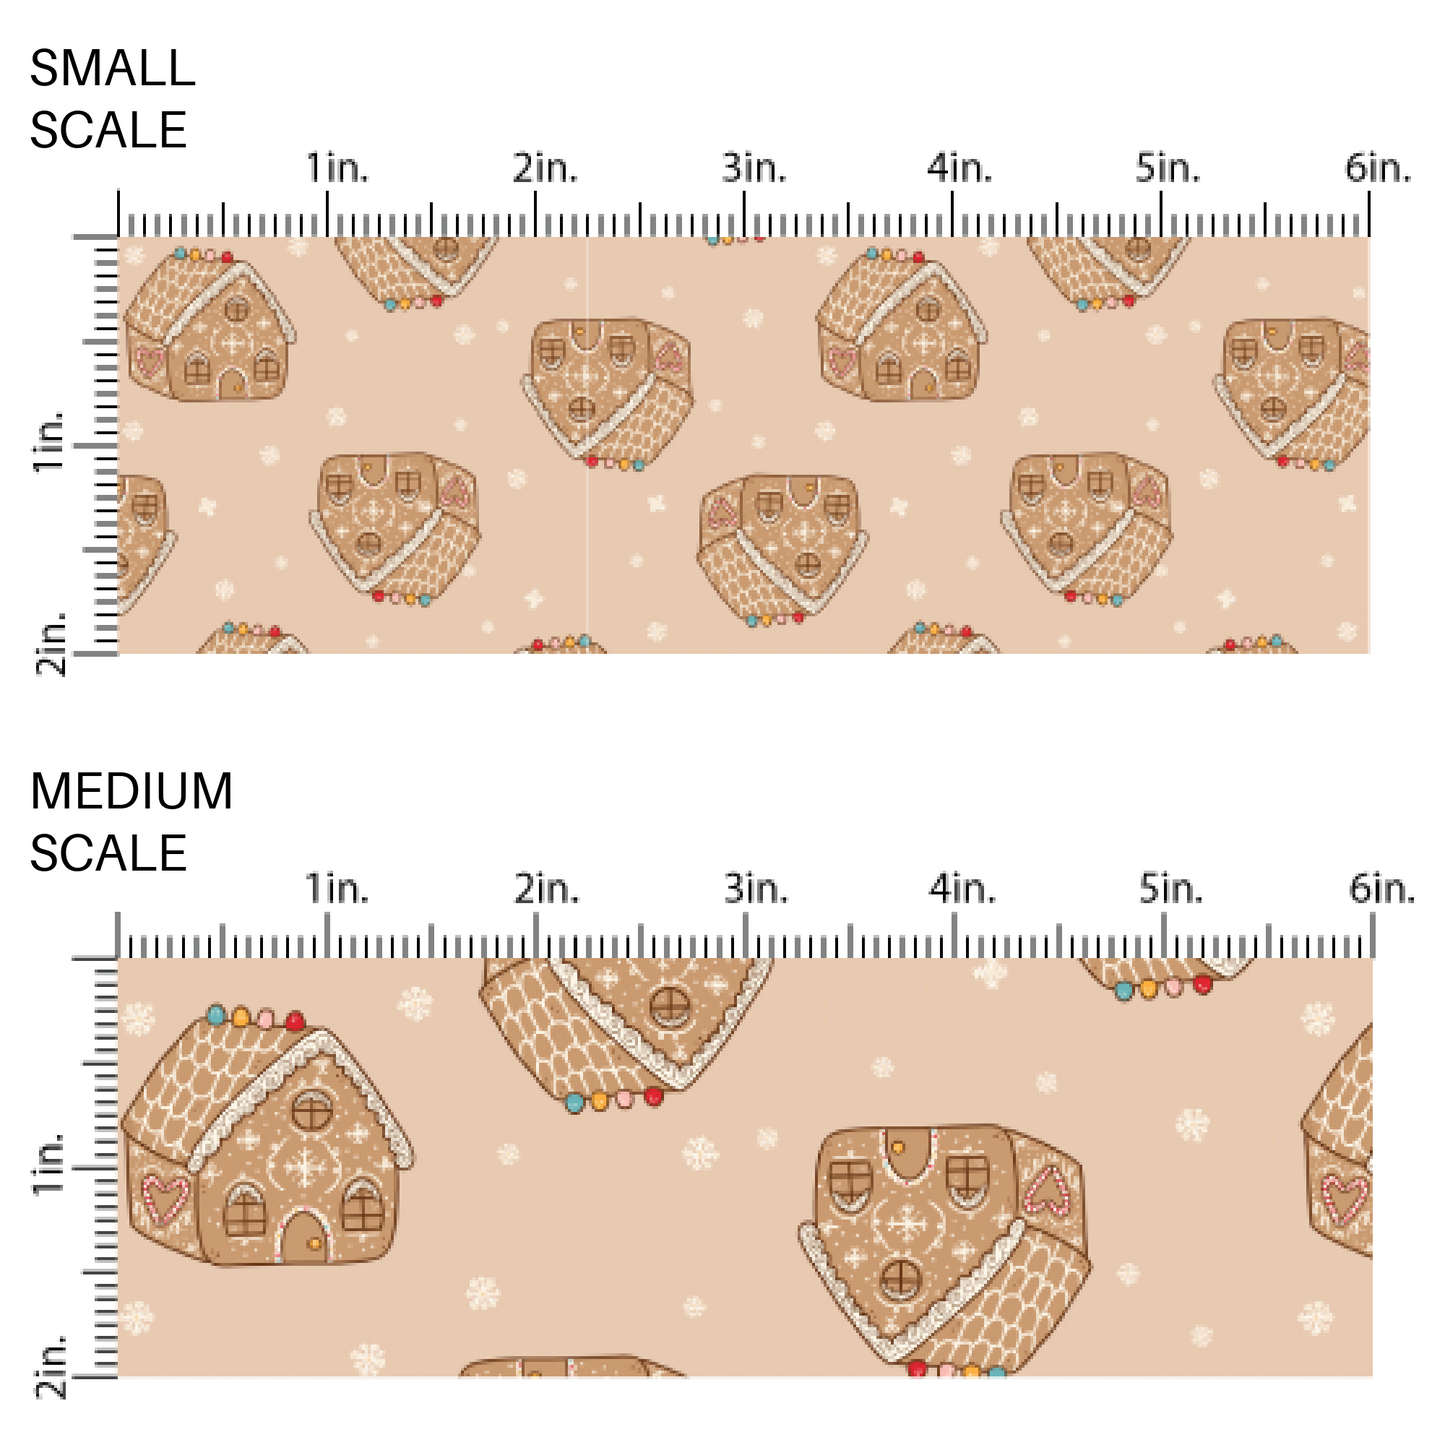 Ginger bread house fabric scaling guide